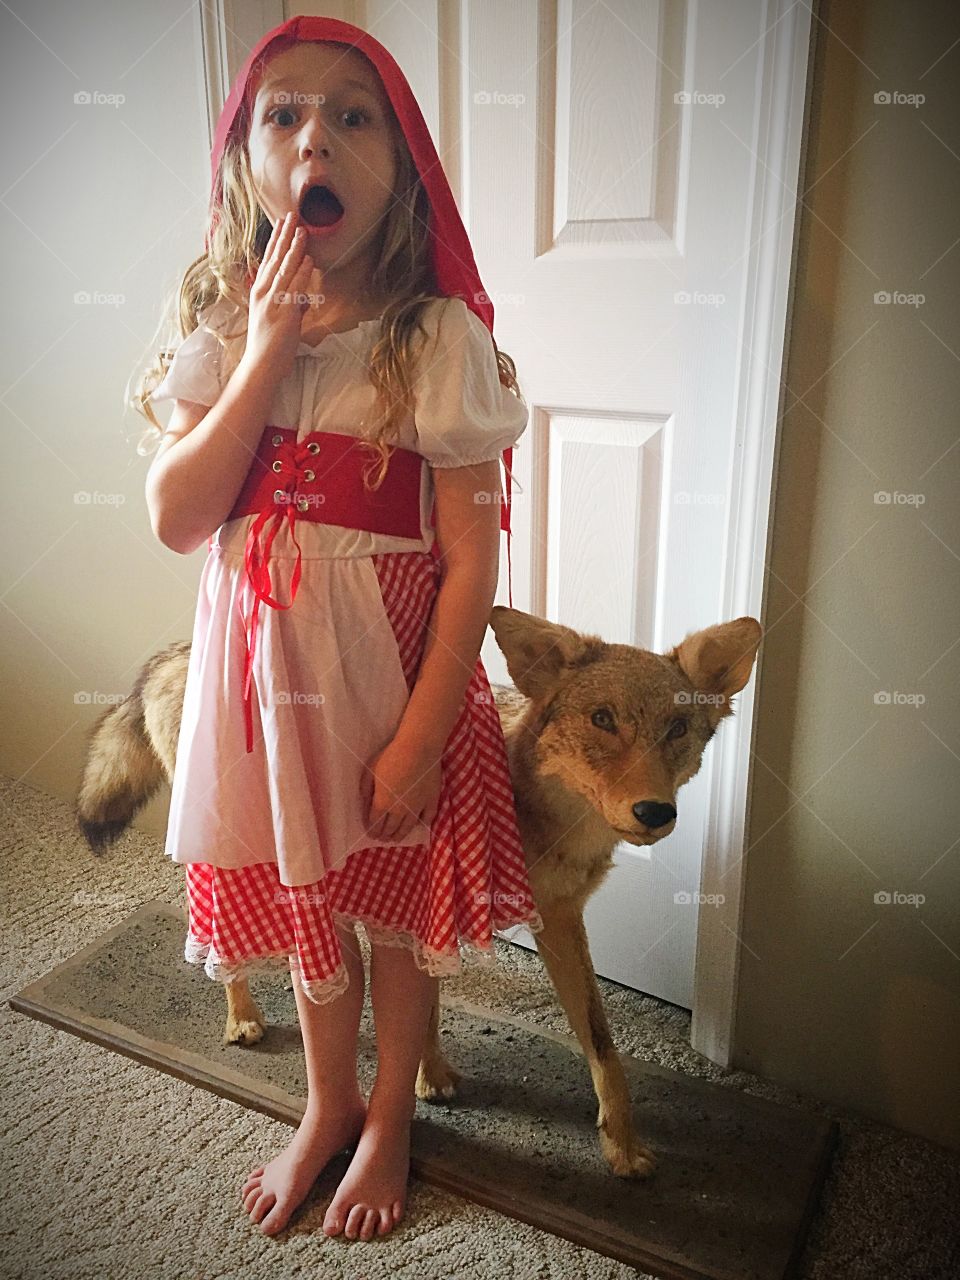 Surprised girl standing with dog